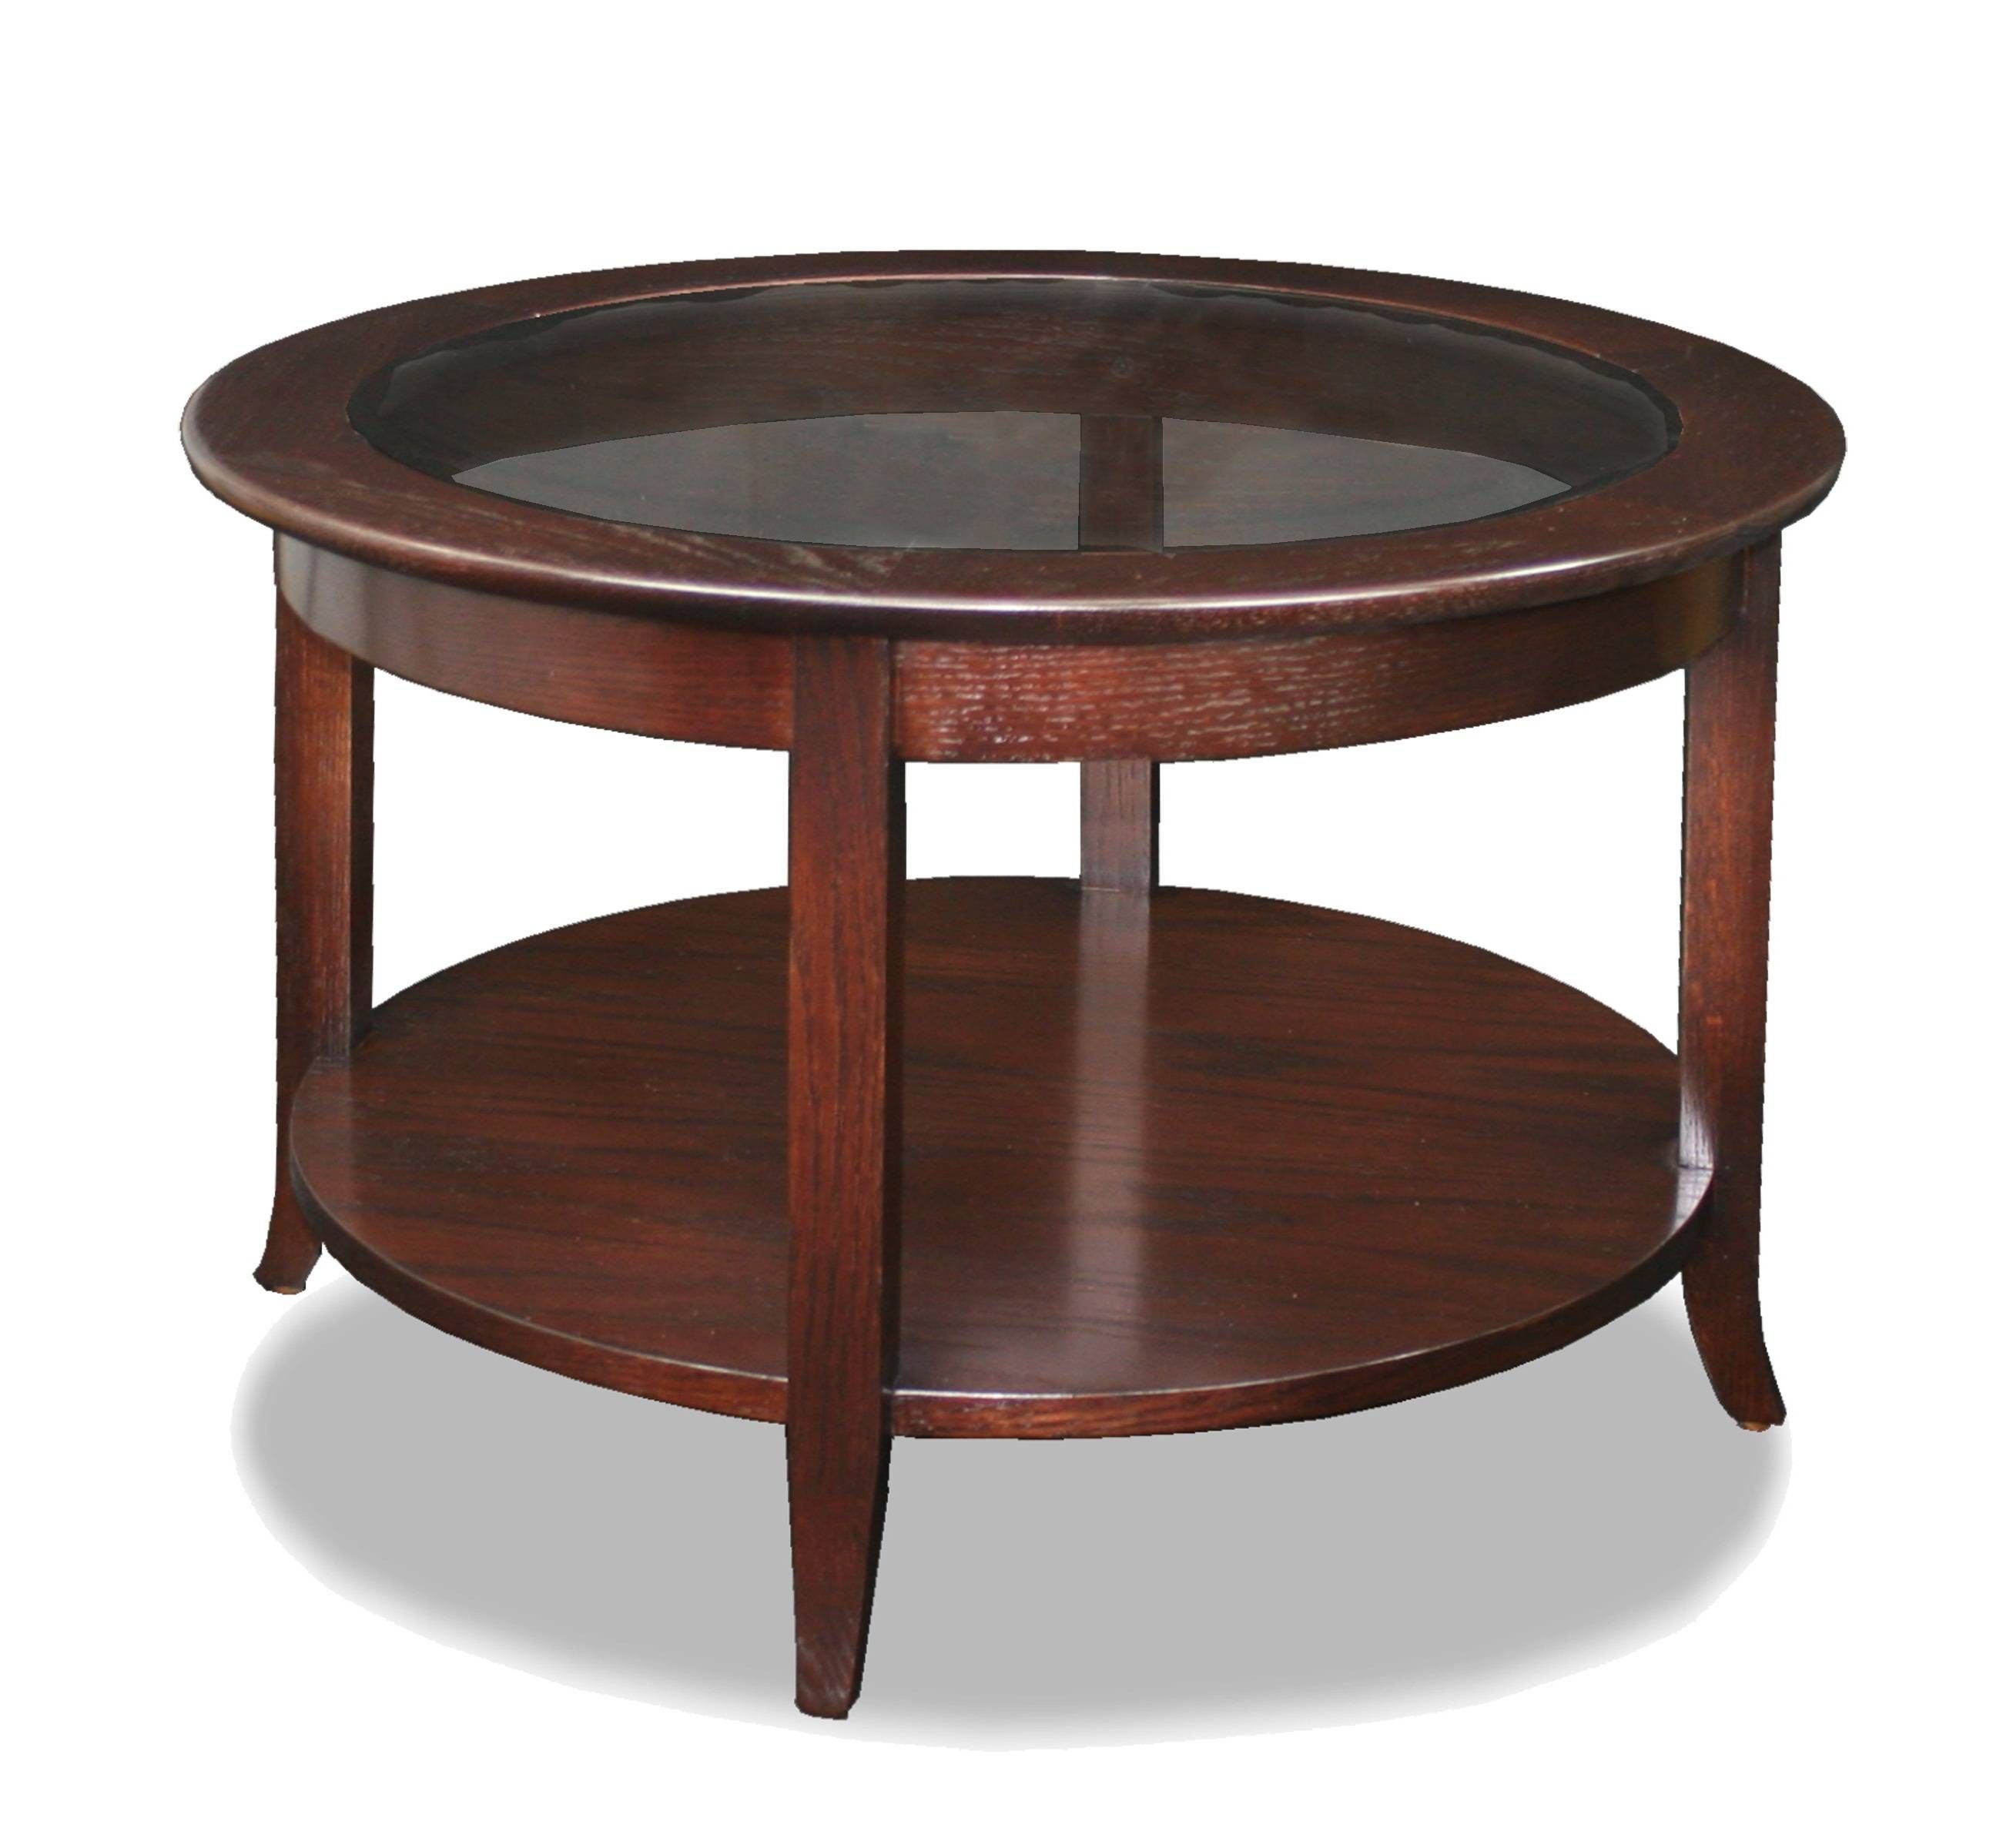 24 Round Wood Coffee Table | Coffee Tables Decoration For Round Glass And Wood Coffee Tables (View 3 of 30)